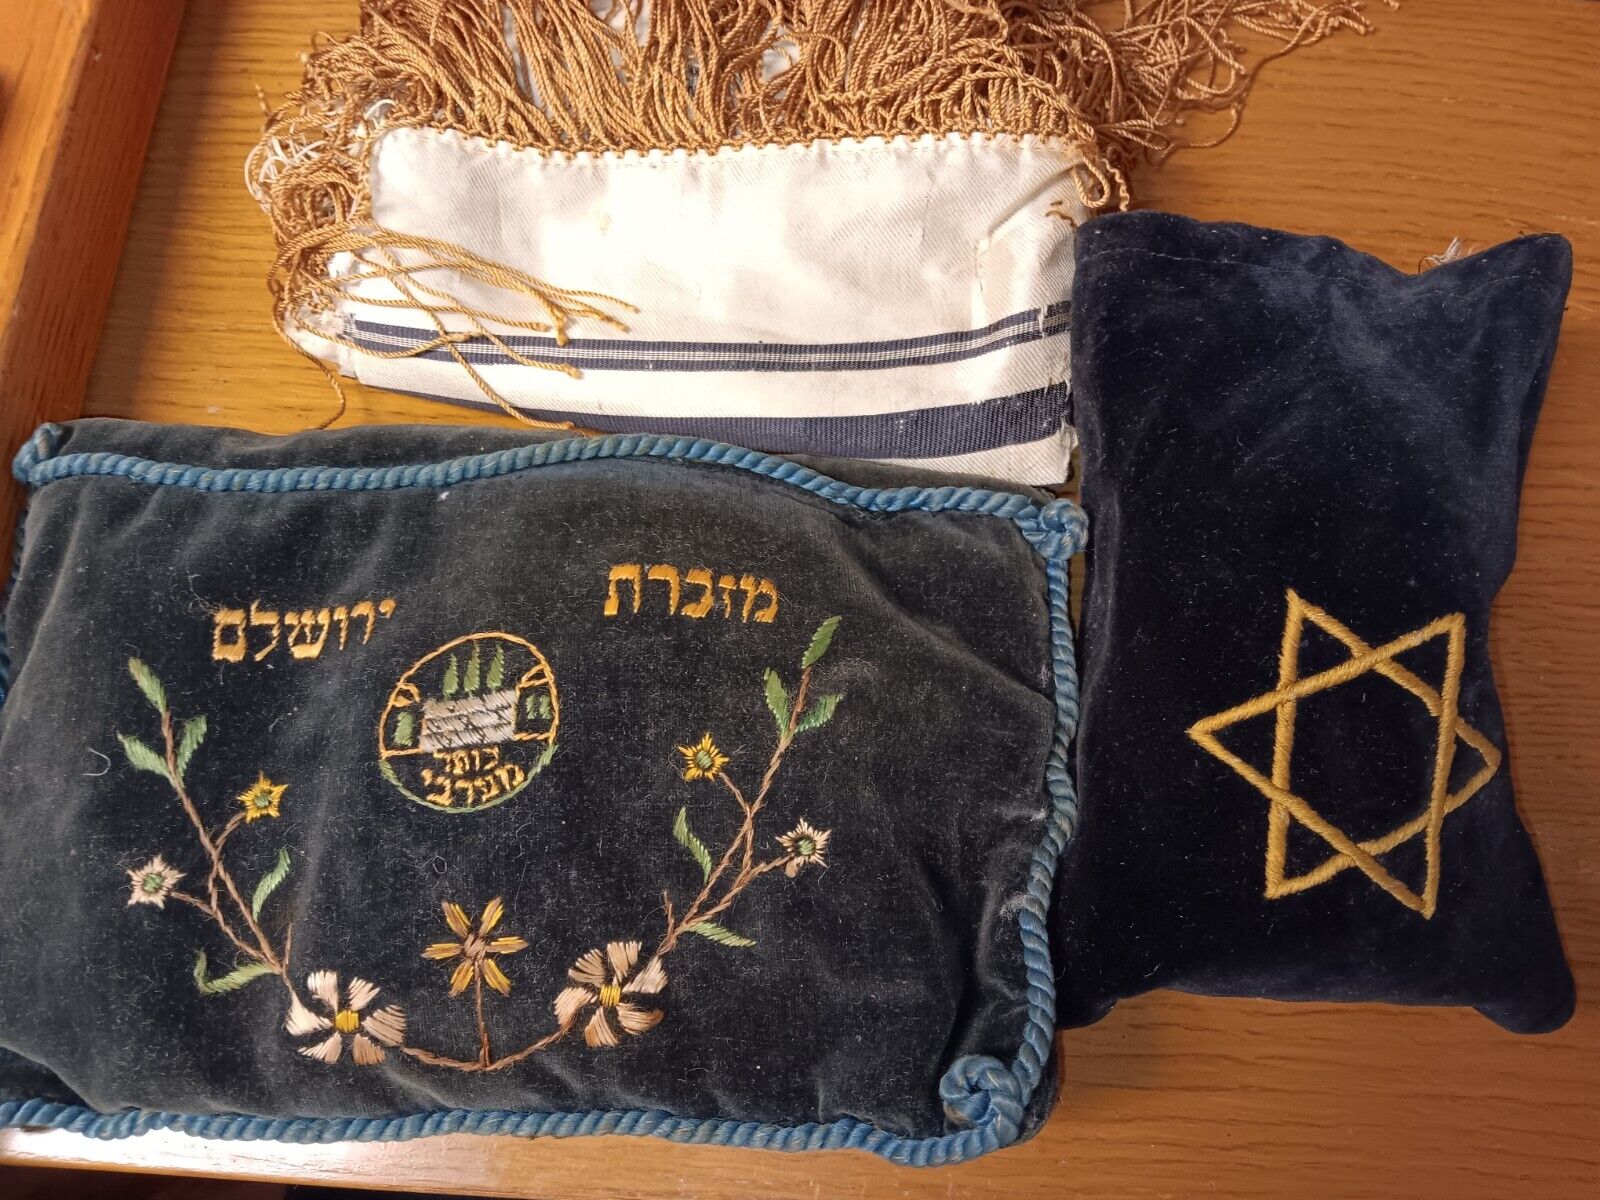 JEWISH ANTIQUE TEFILLIN PHYLACTERIES and 2 TALITOT  Prayer Shawls with bags